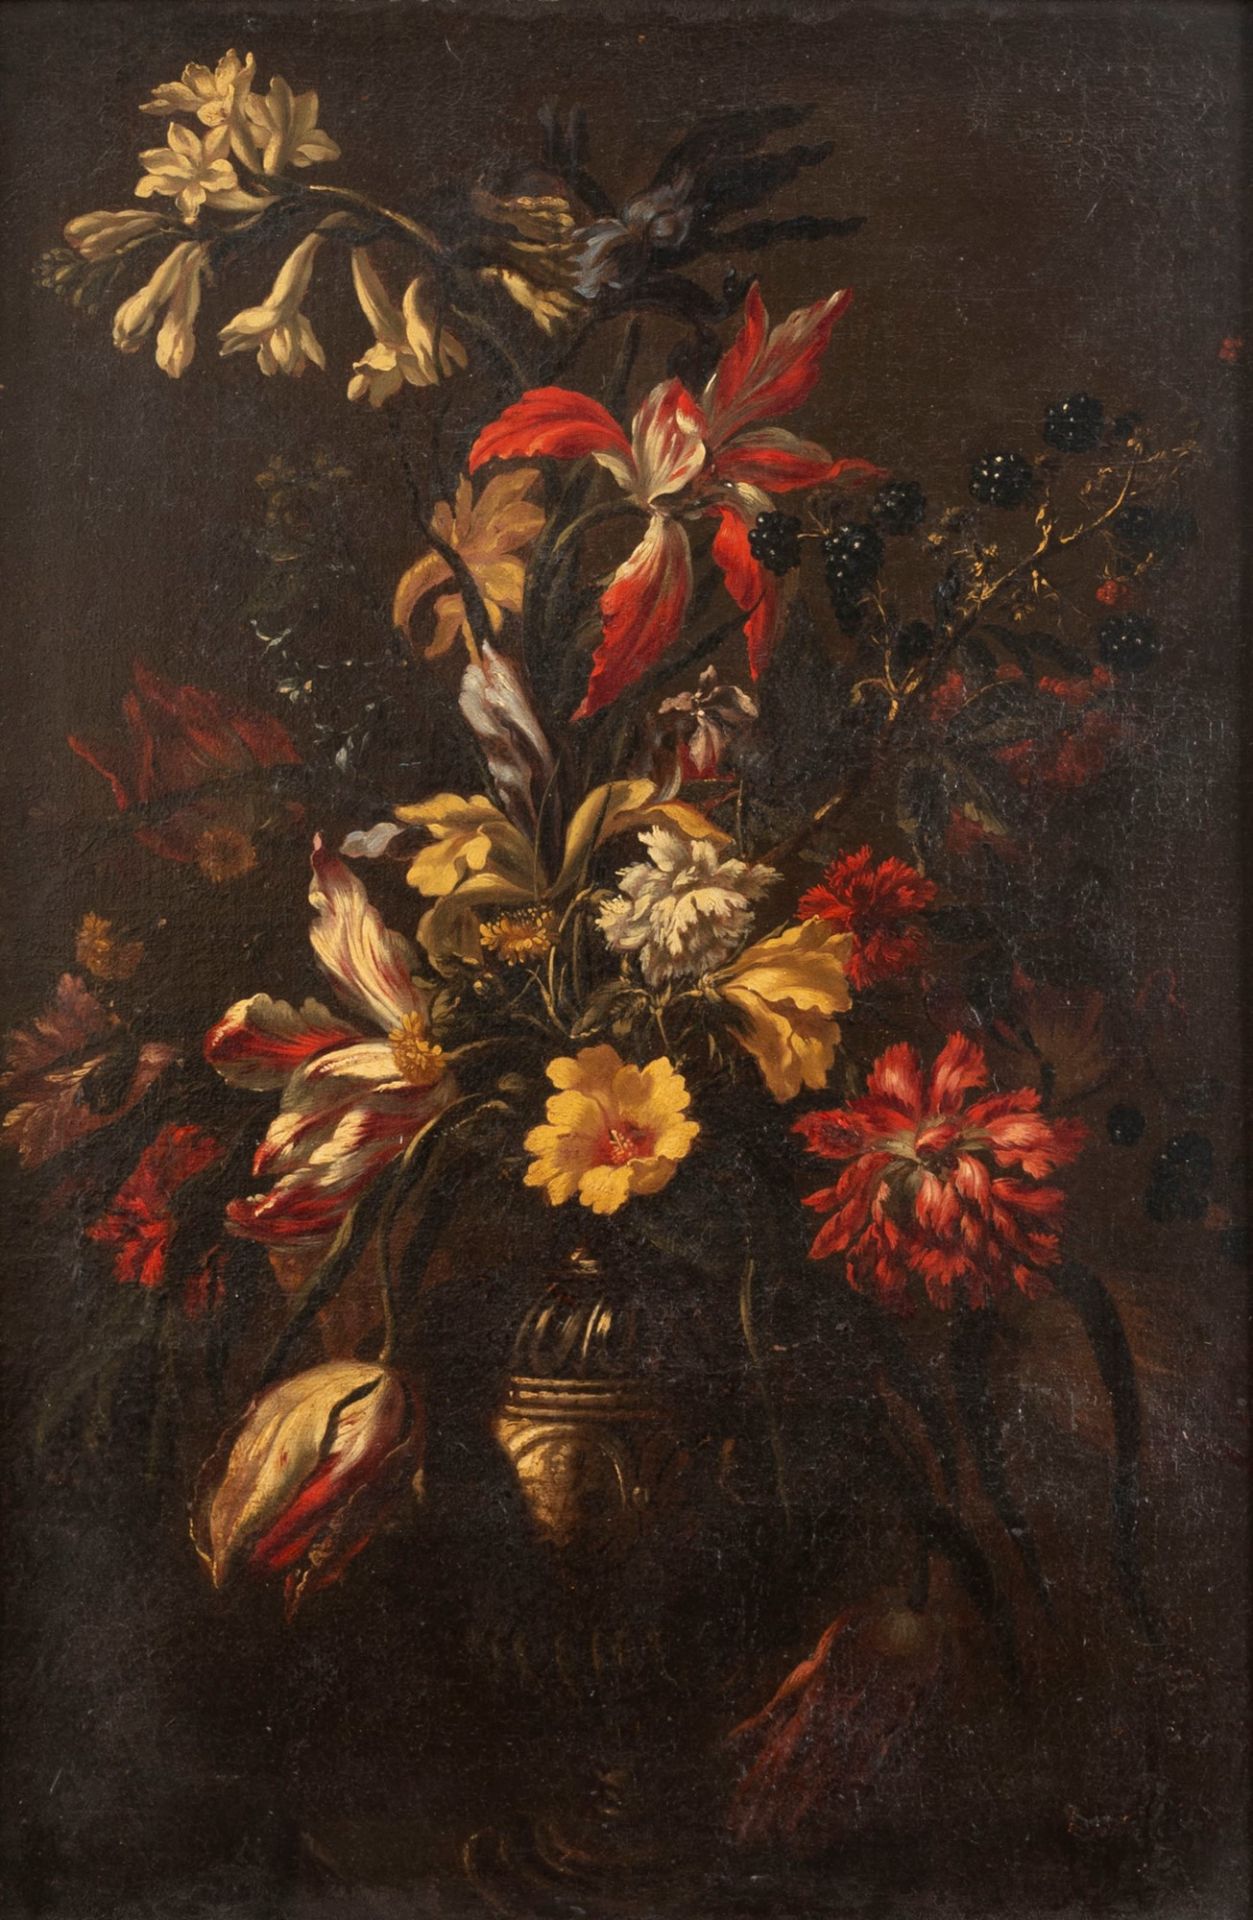 Circle by Francesco Caldei (Mantua, c. 1584 – Venice, 1674) - Flowerpot with tulips and carnations